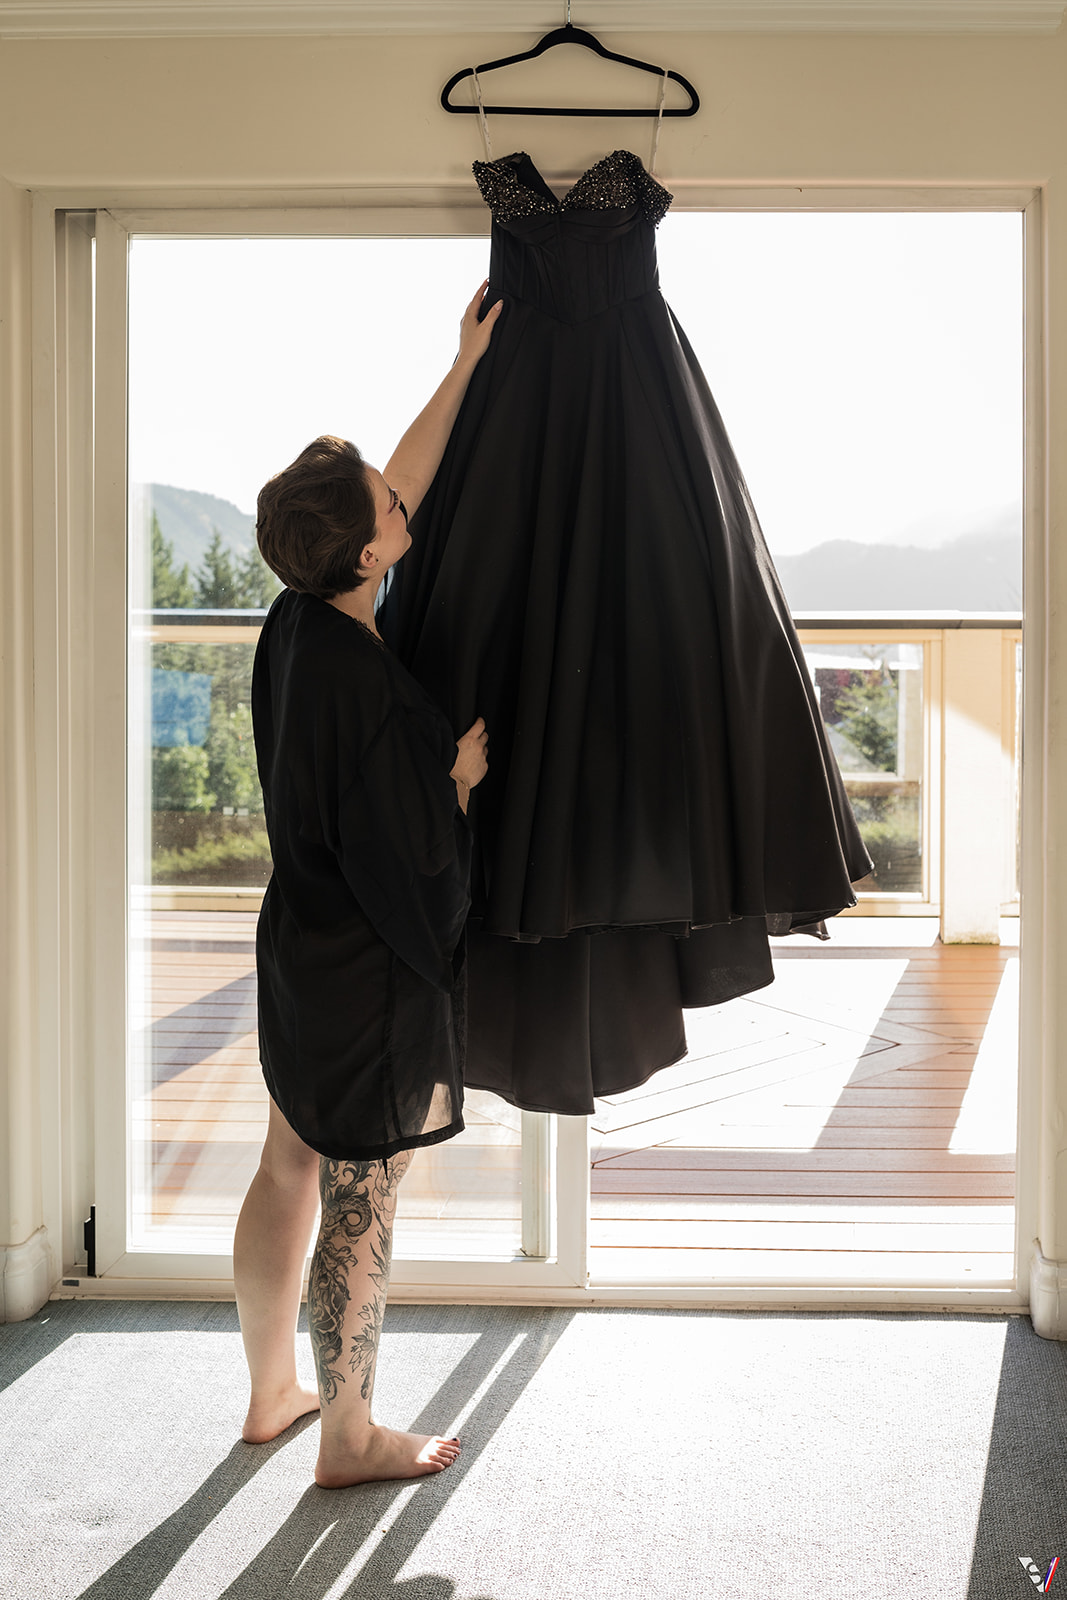 The bride was gently dressed in a black satin kimono, looking at her dress. 